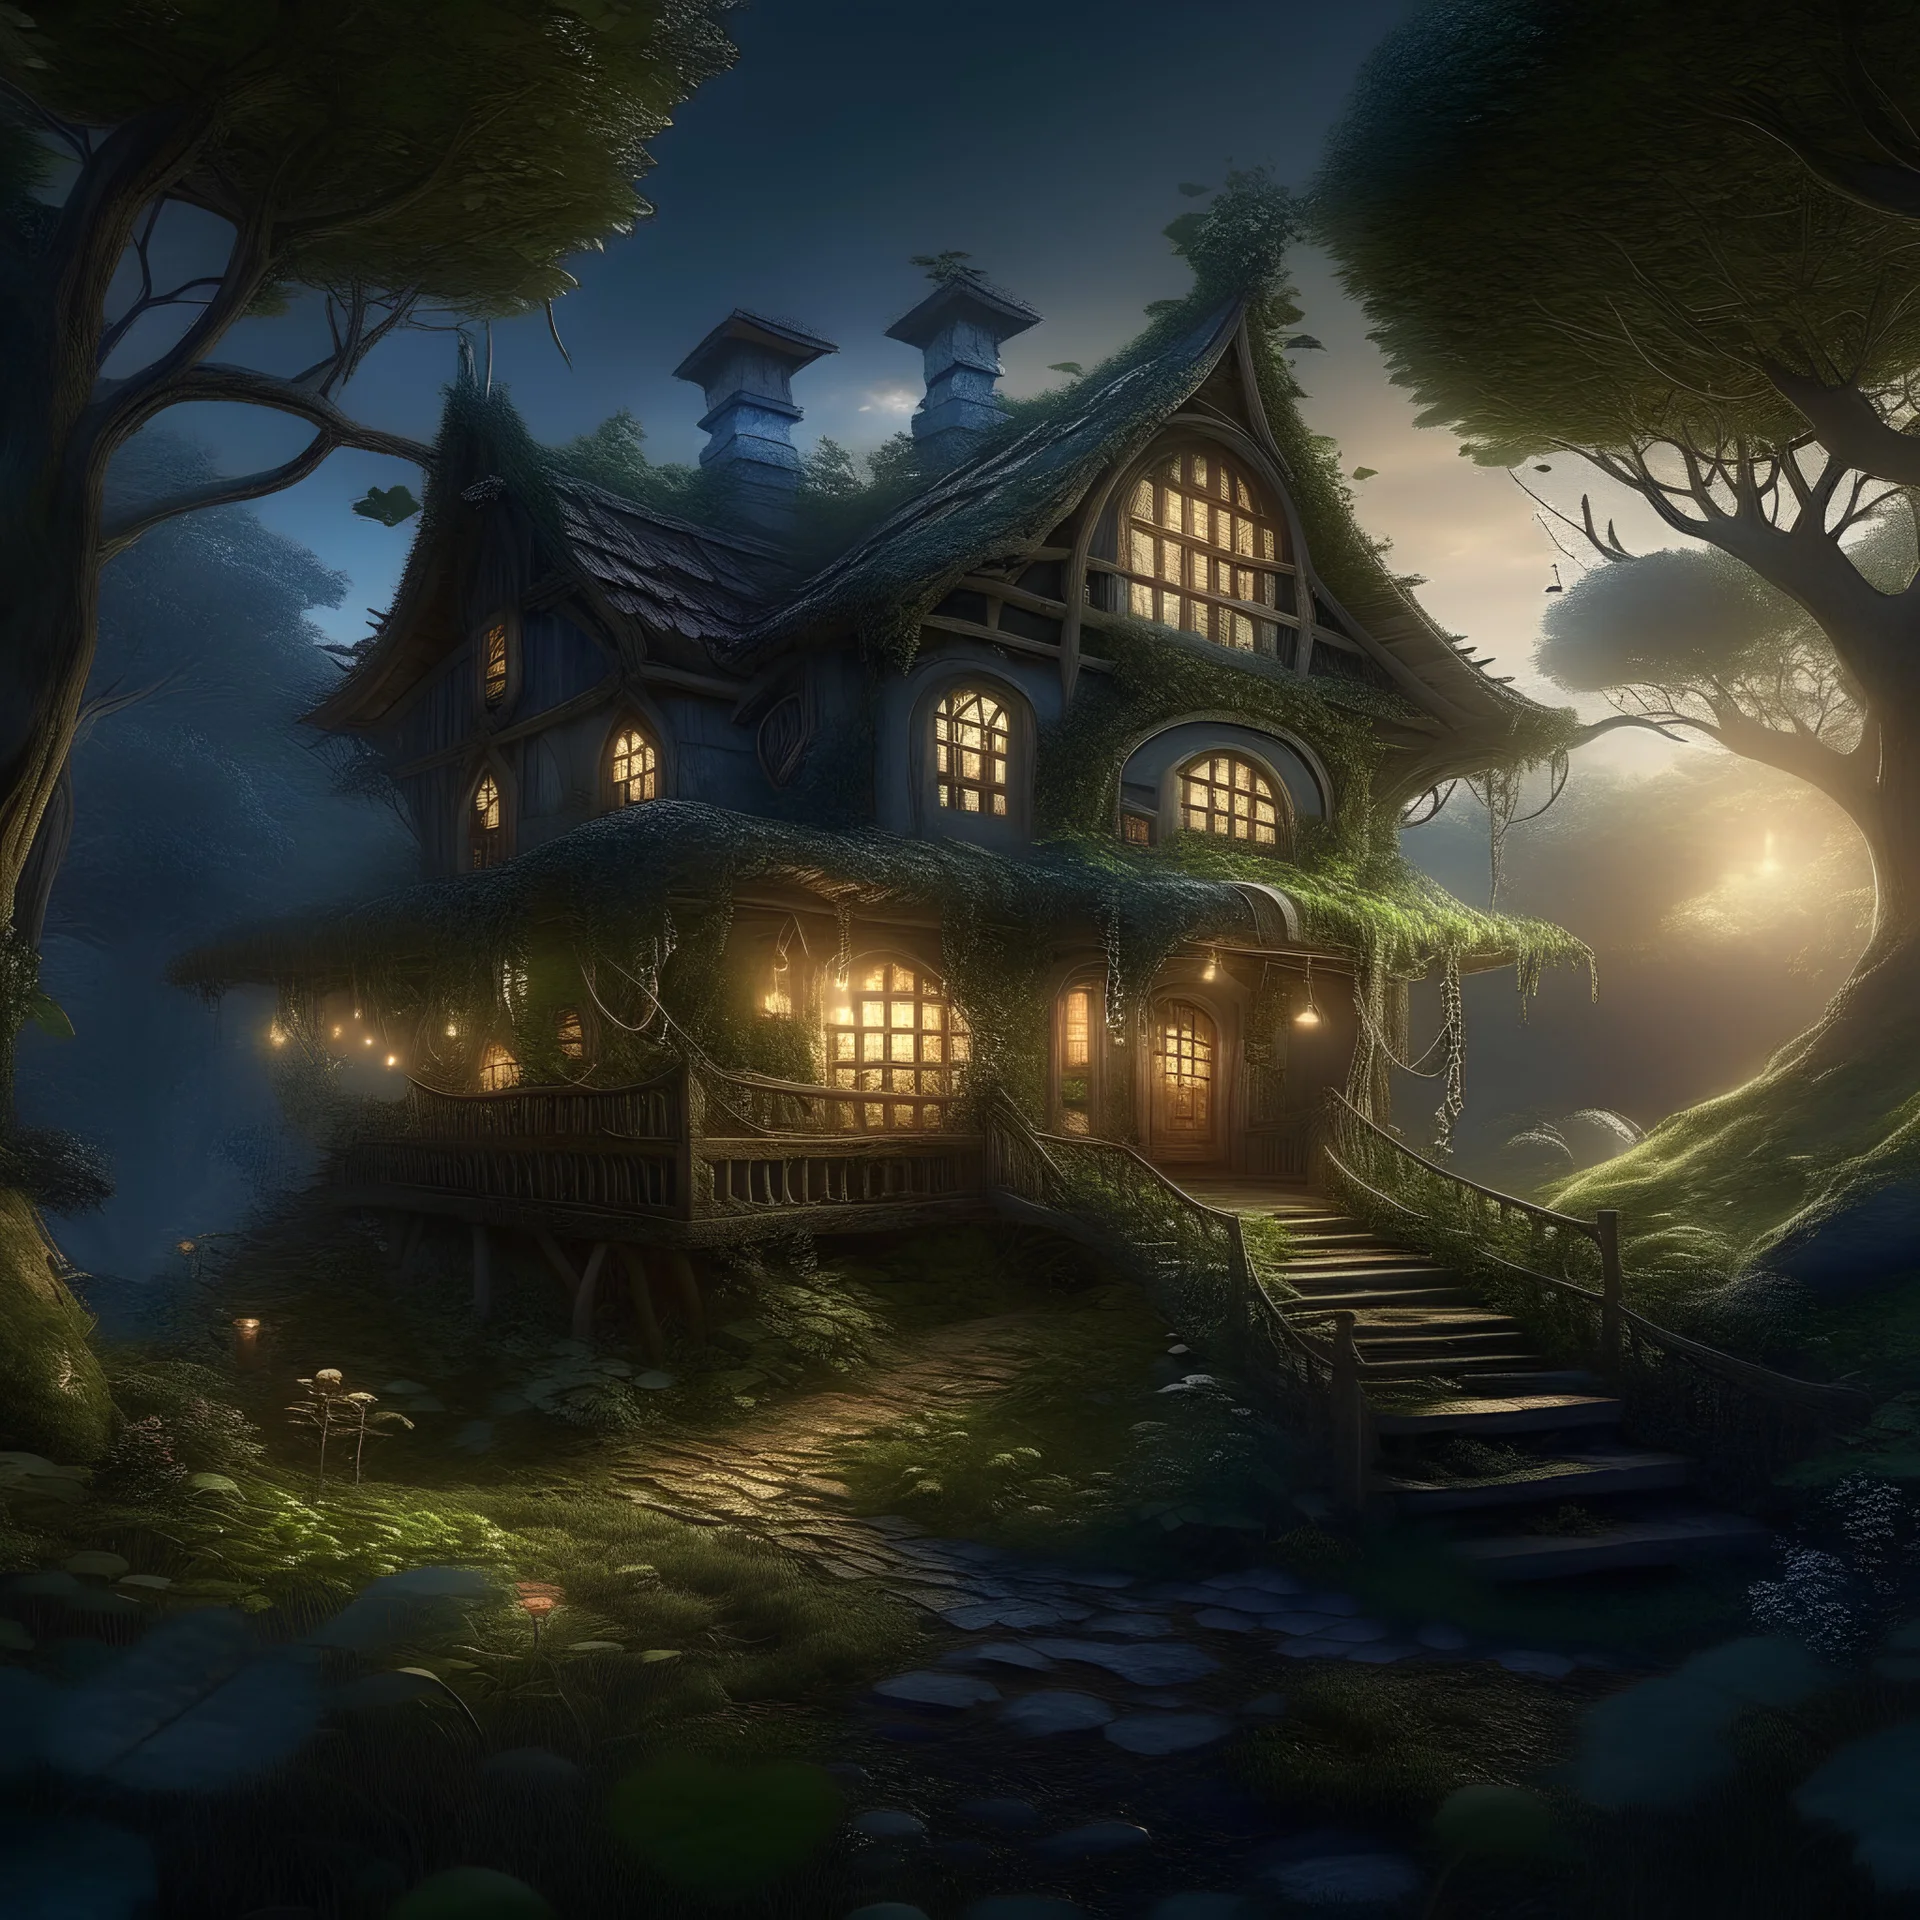 In the heart of a mystical woodland, the mysterious forest house stands silent and proud, its architecture seamlessly blending with nature. Twisting vines adorn its exterior, and a winding trail of fireflies illuminates the way to this ethereal abode as night falls